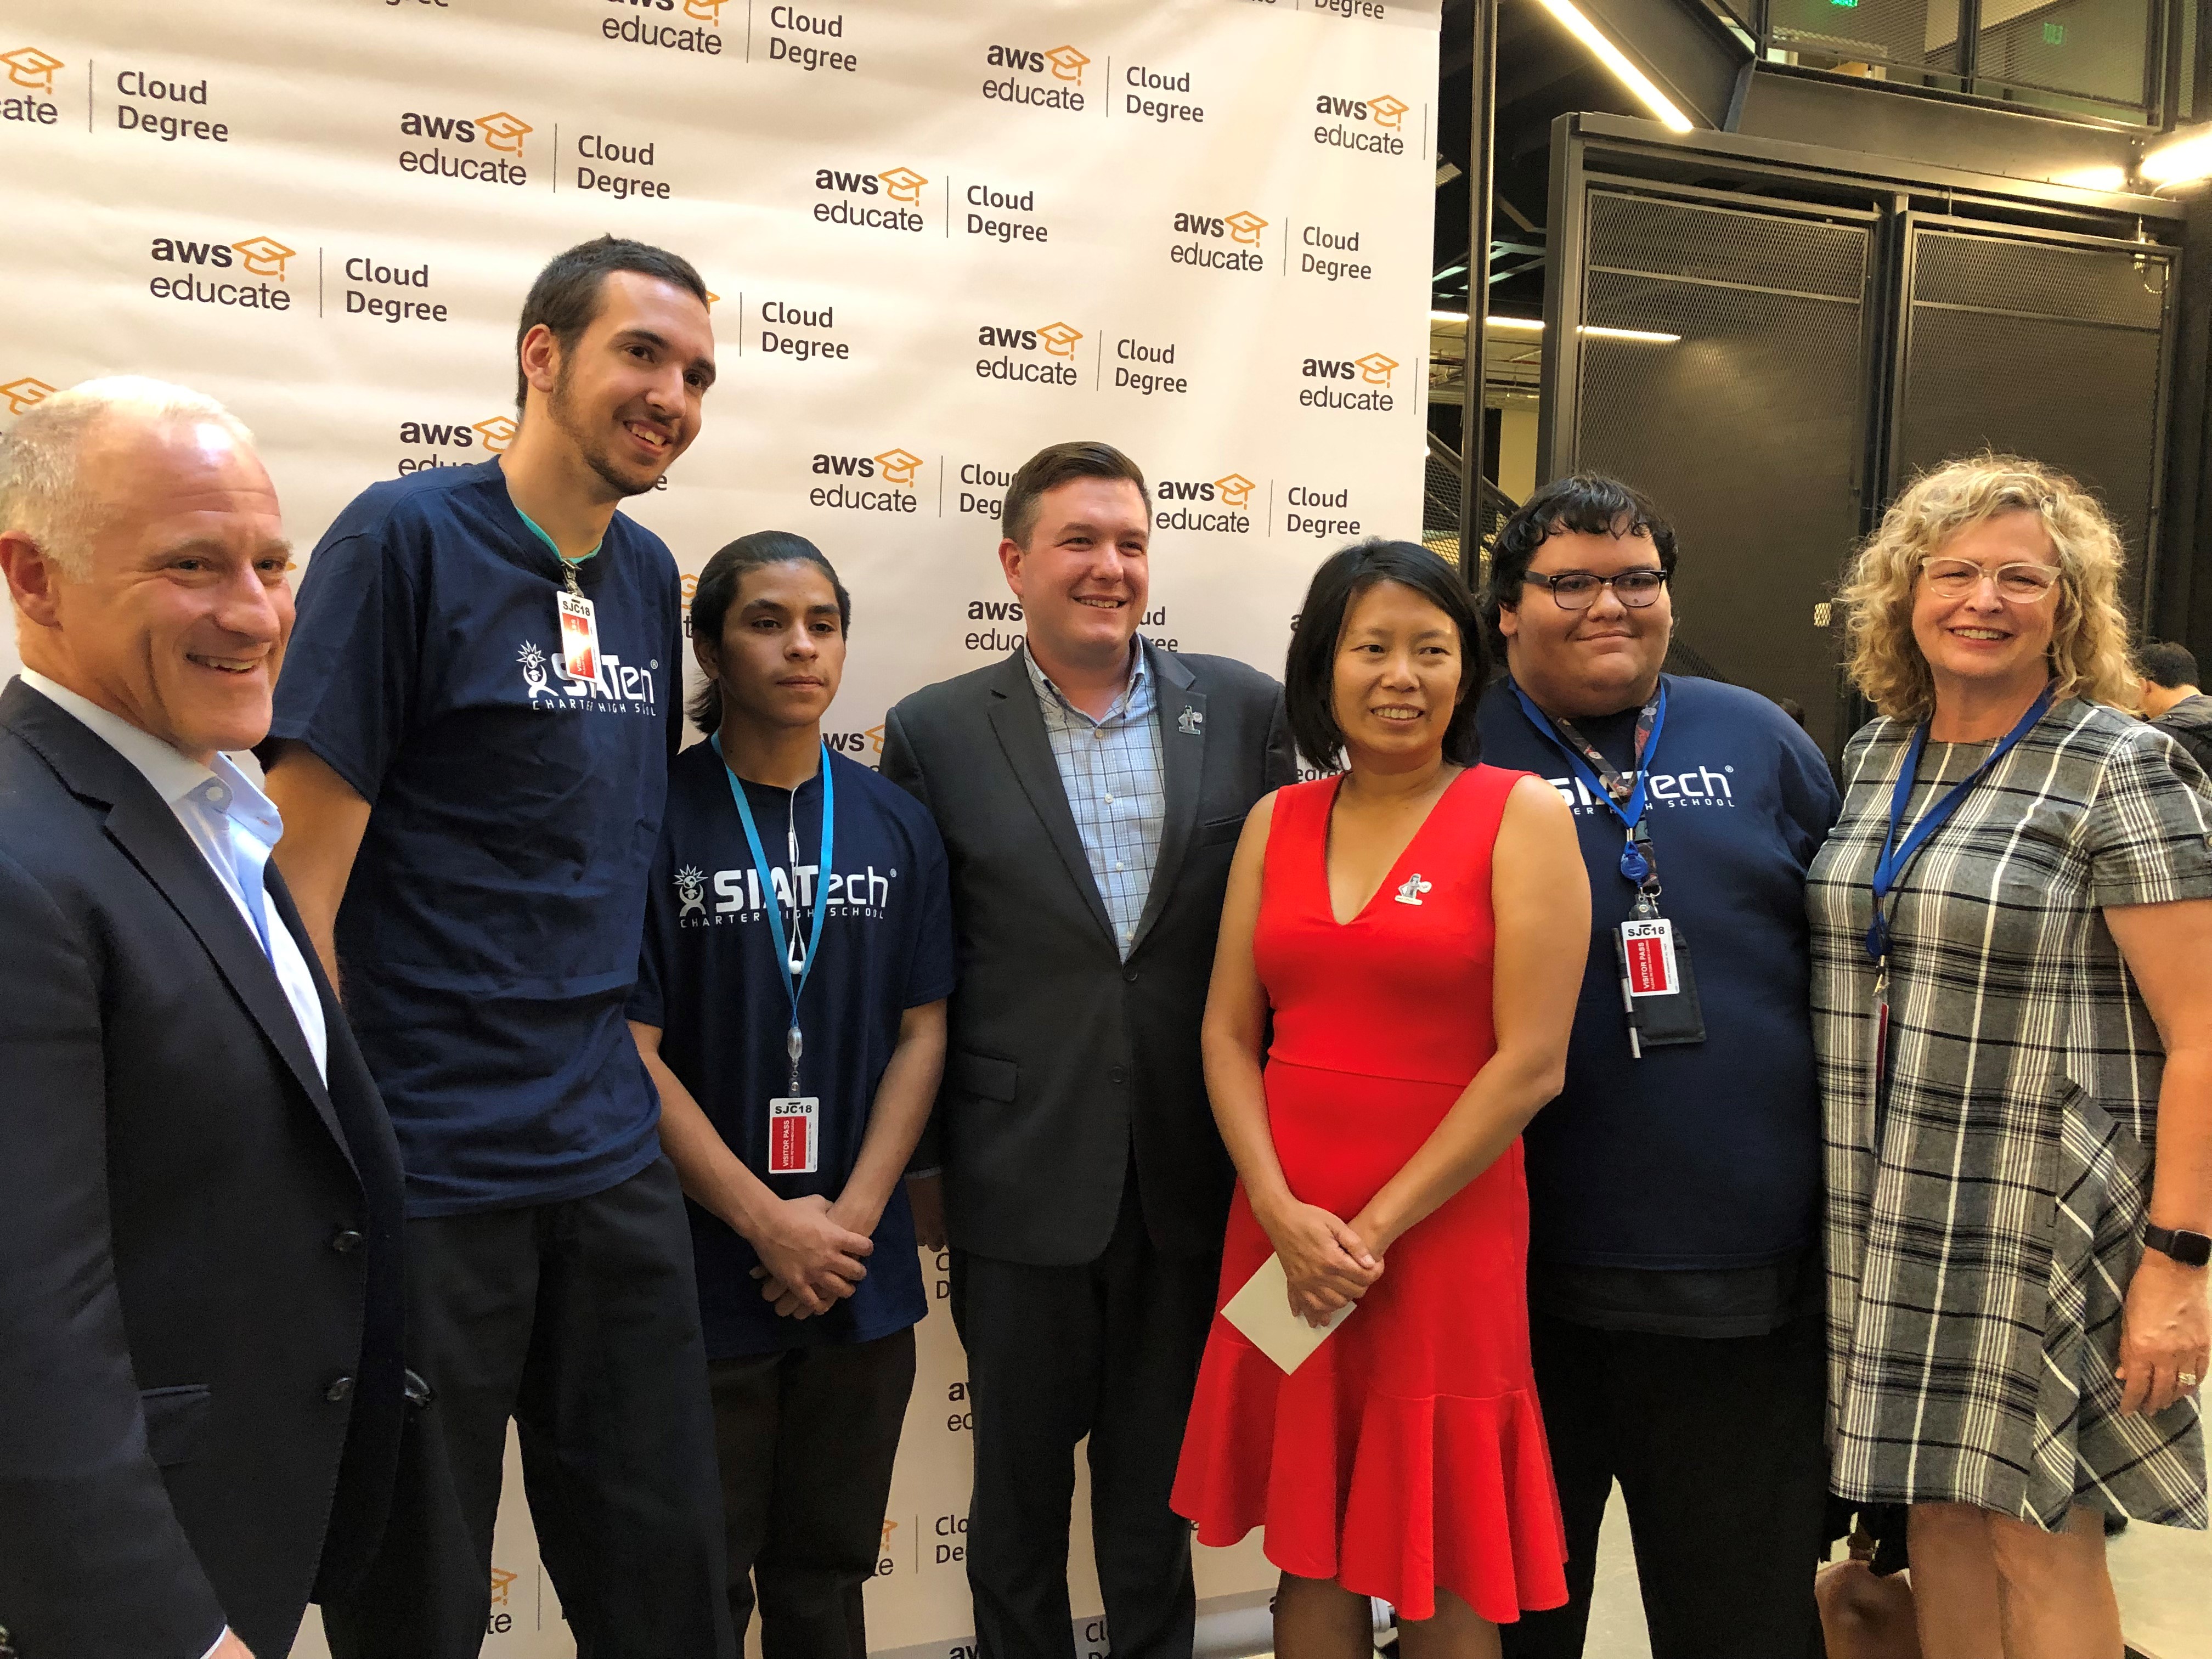 SIATech students and Chief Development Officer Laurie Pianka (far right) at launch of this new regional consortium to prepare students for jobs in one of the fastest-growing, highest paying areas in tech: cloud computing.